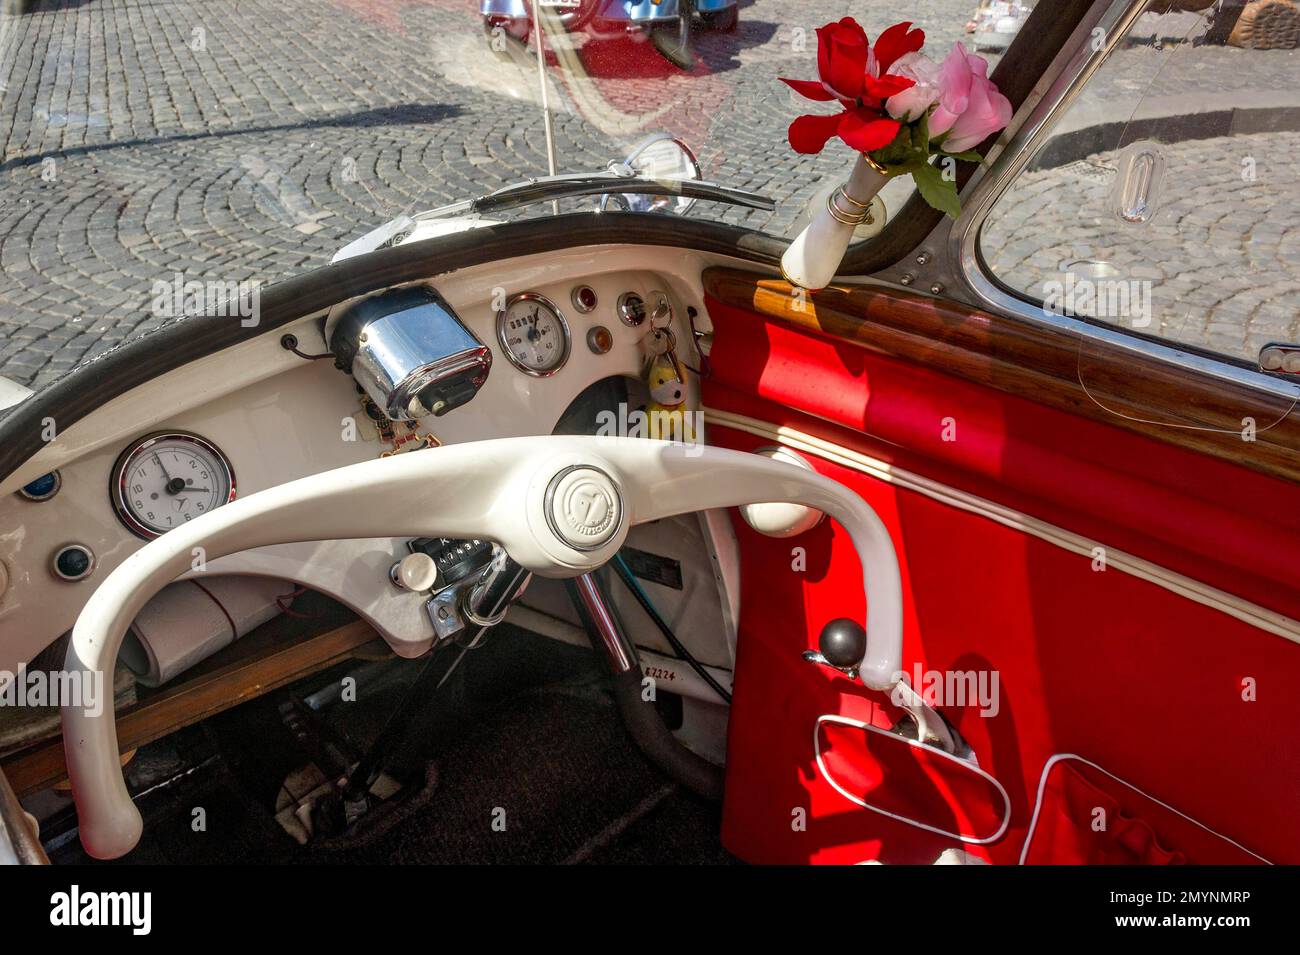 Vintage Messerschmitt cabin scooter KR 200, year of manufacture 1955 to  1964, dashboard, steering column and flower vase, Nidda, Hesse, Germany,  Europ Stock Photo - Alamy